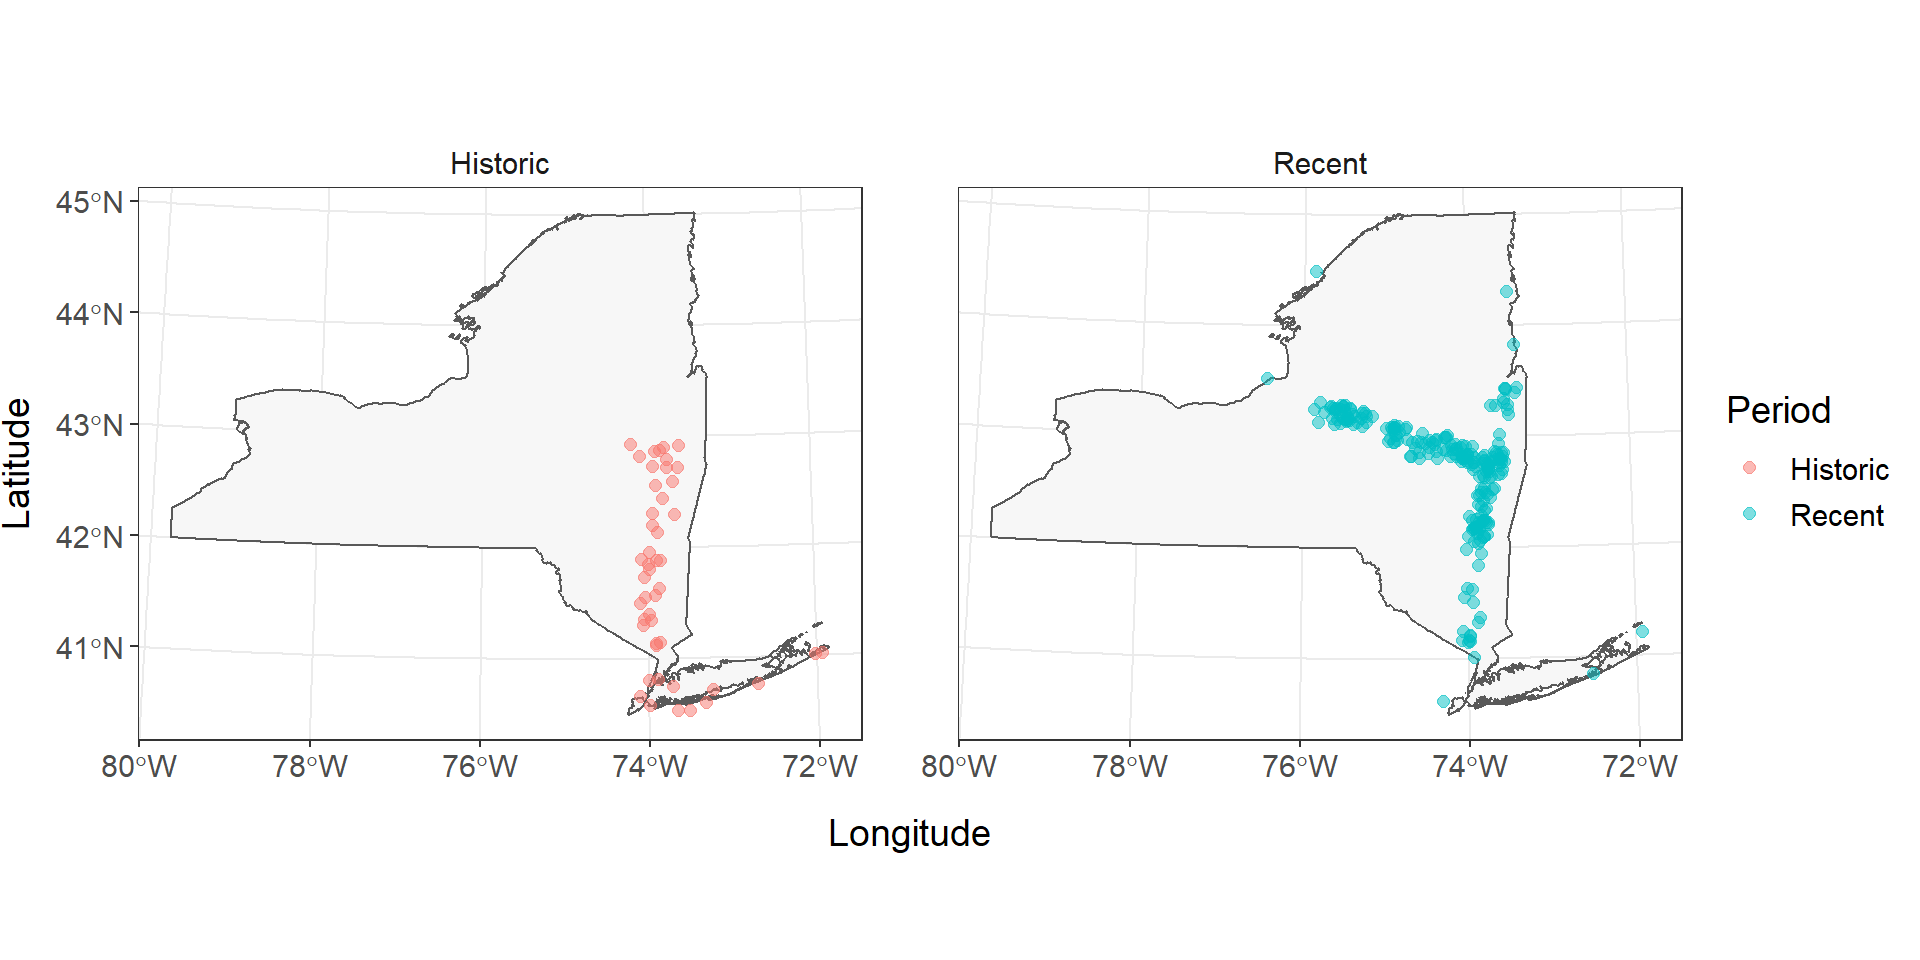 Historical (1934-1970) and recent (1970-present) records of Alosa aestivalis in New York, USA (Carlson et al. 2016). Records missing exact dates or locations are not displayed.